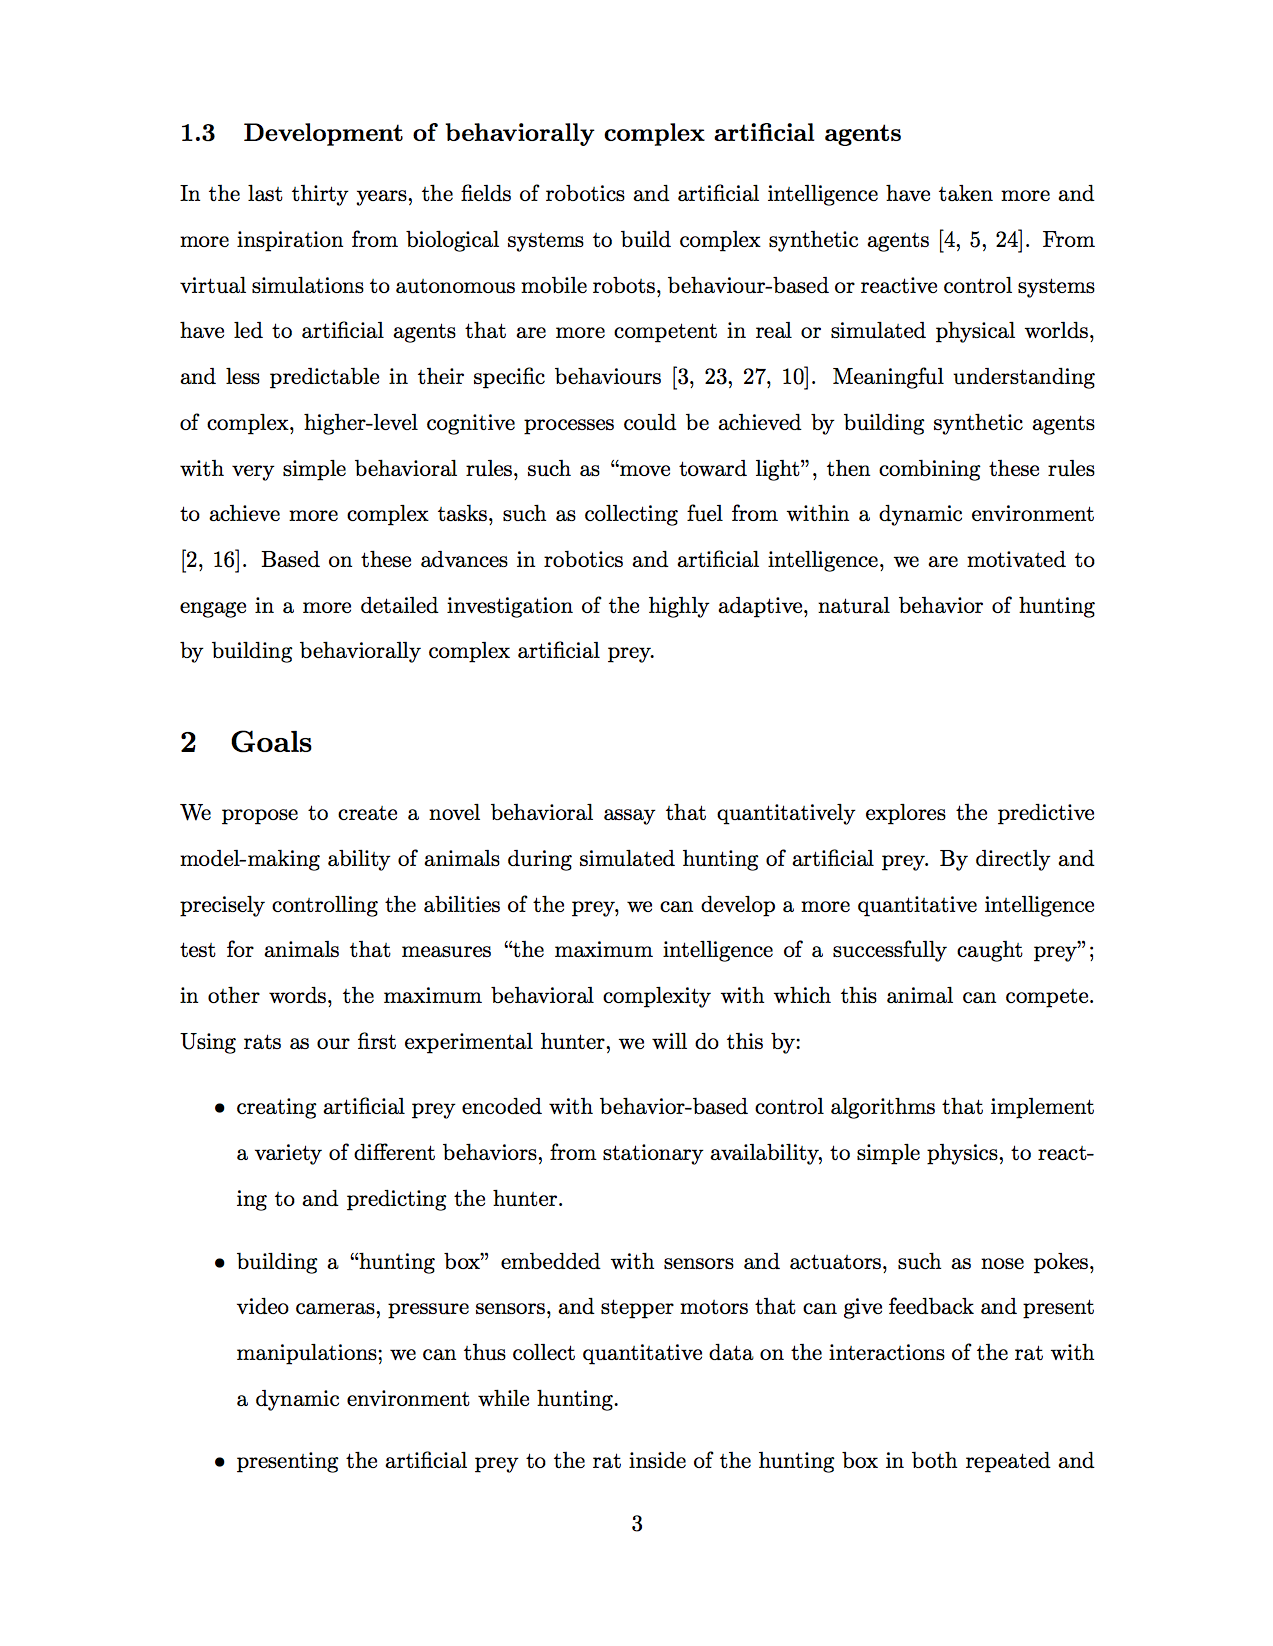 PhD thesis proposal, page 03